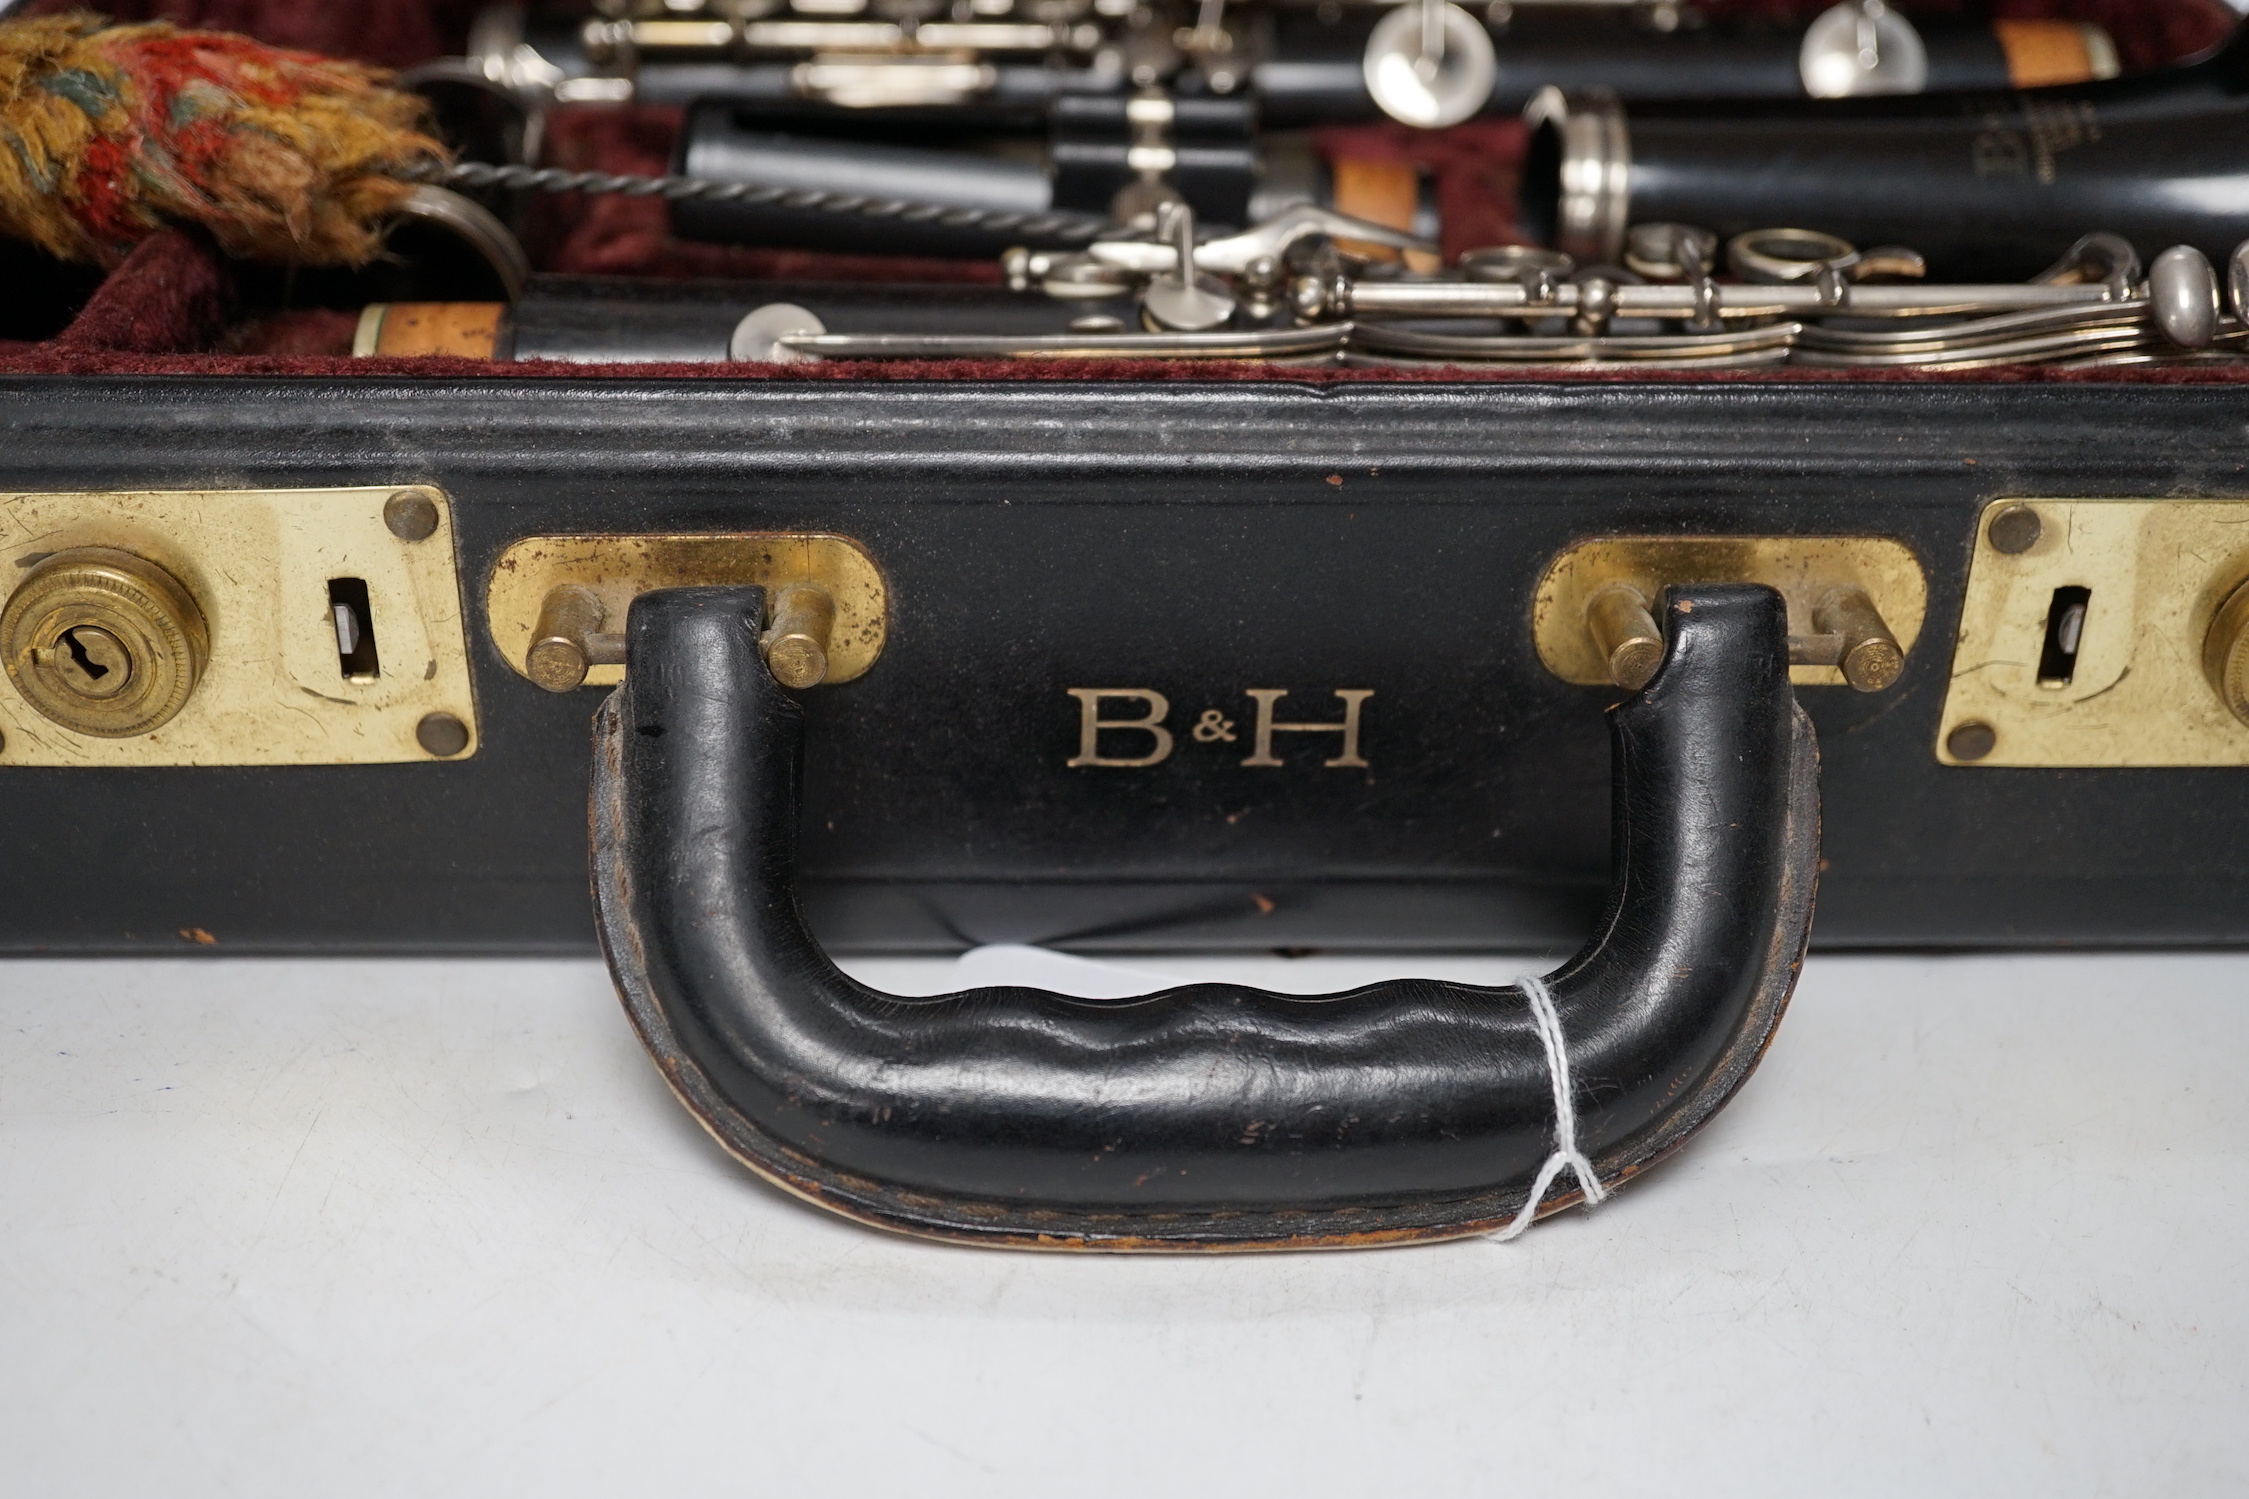 A cased Boosey & Hawkes 4-20 clarinet, in a fine original fitted leather case